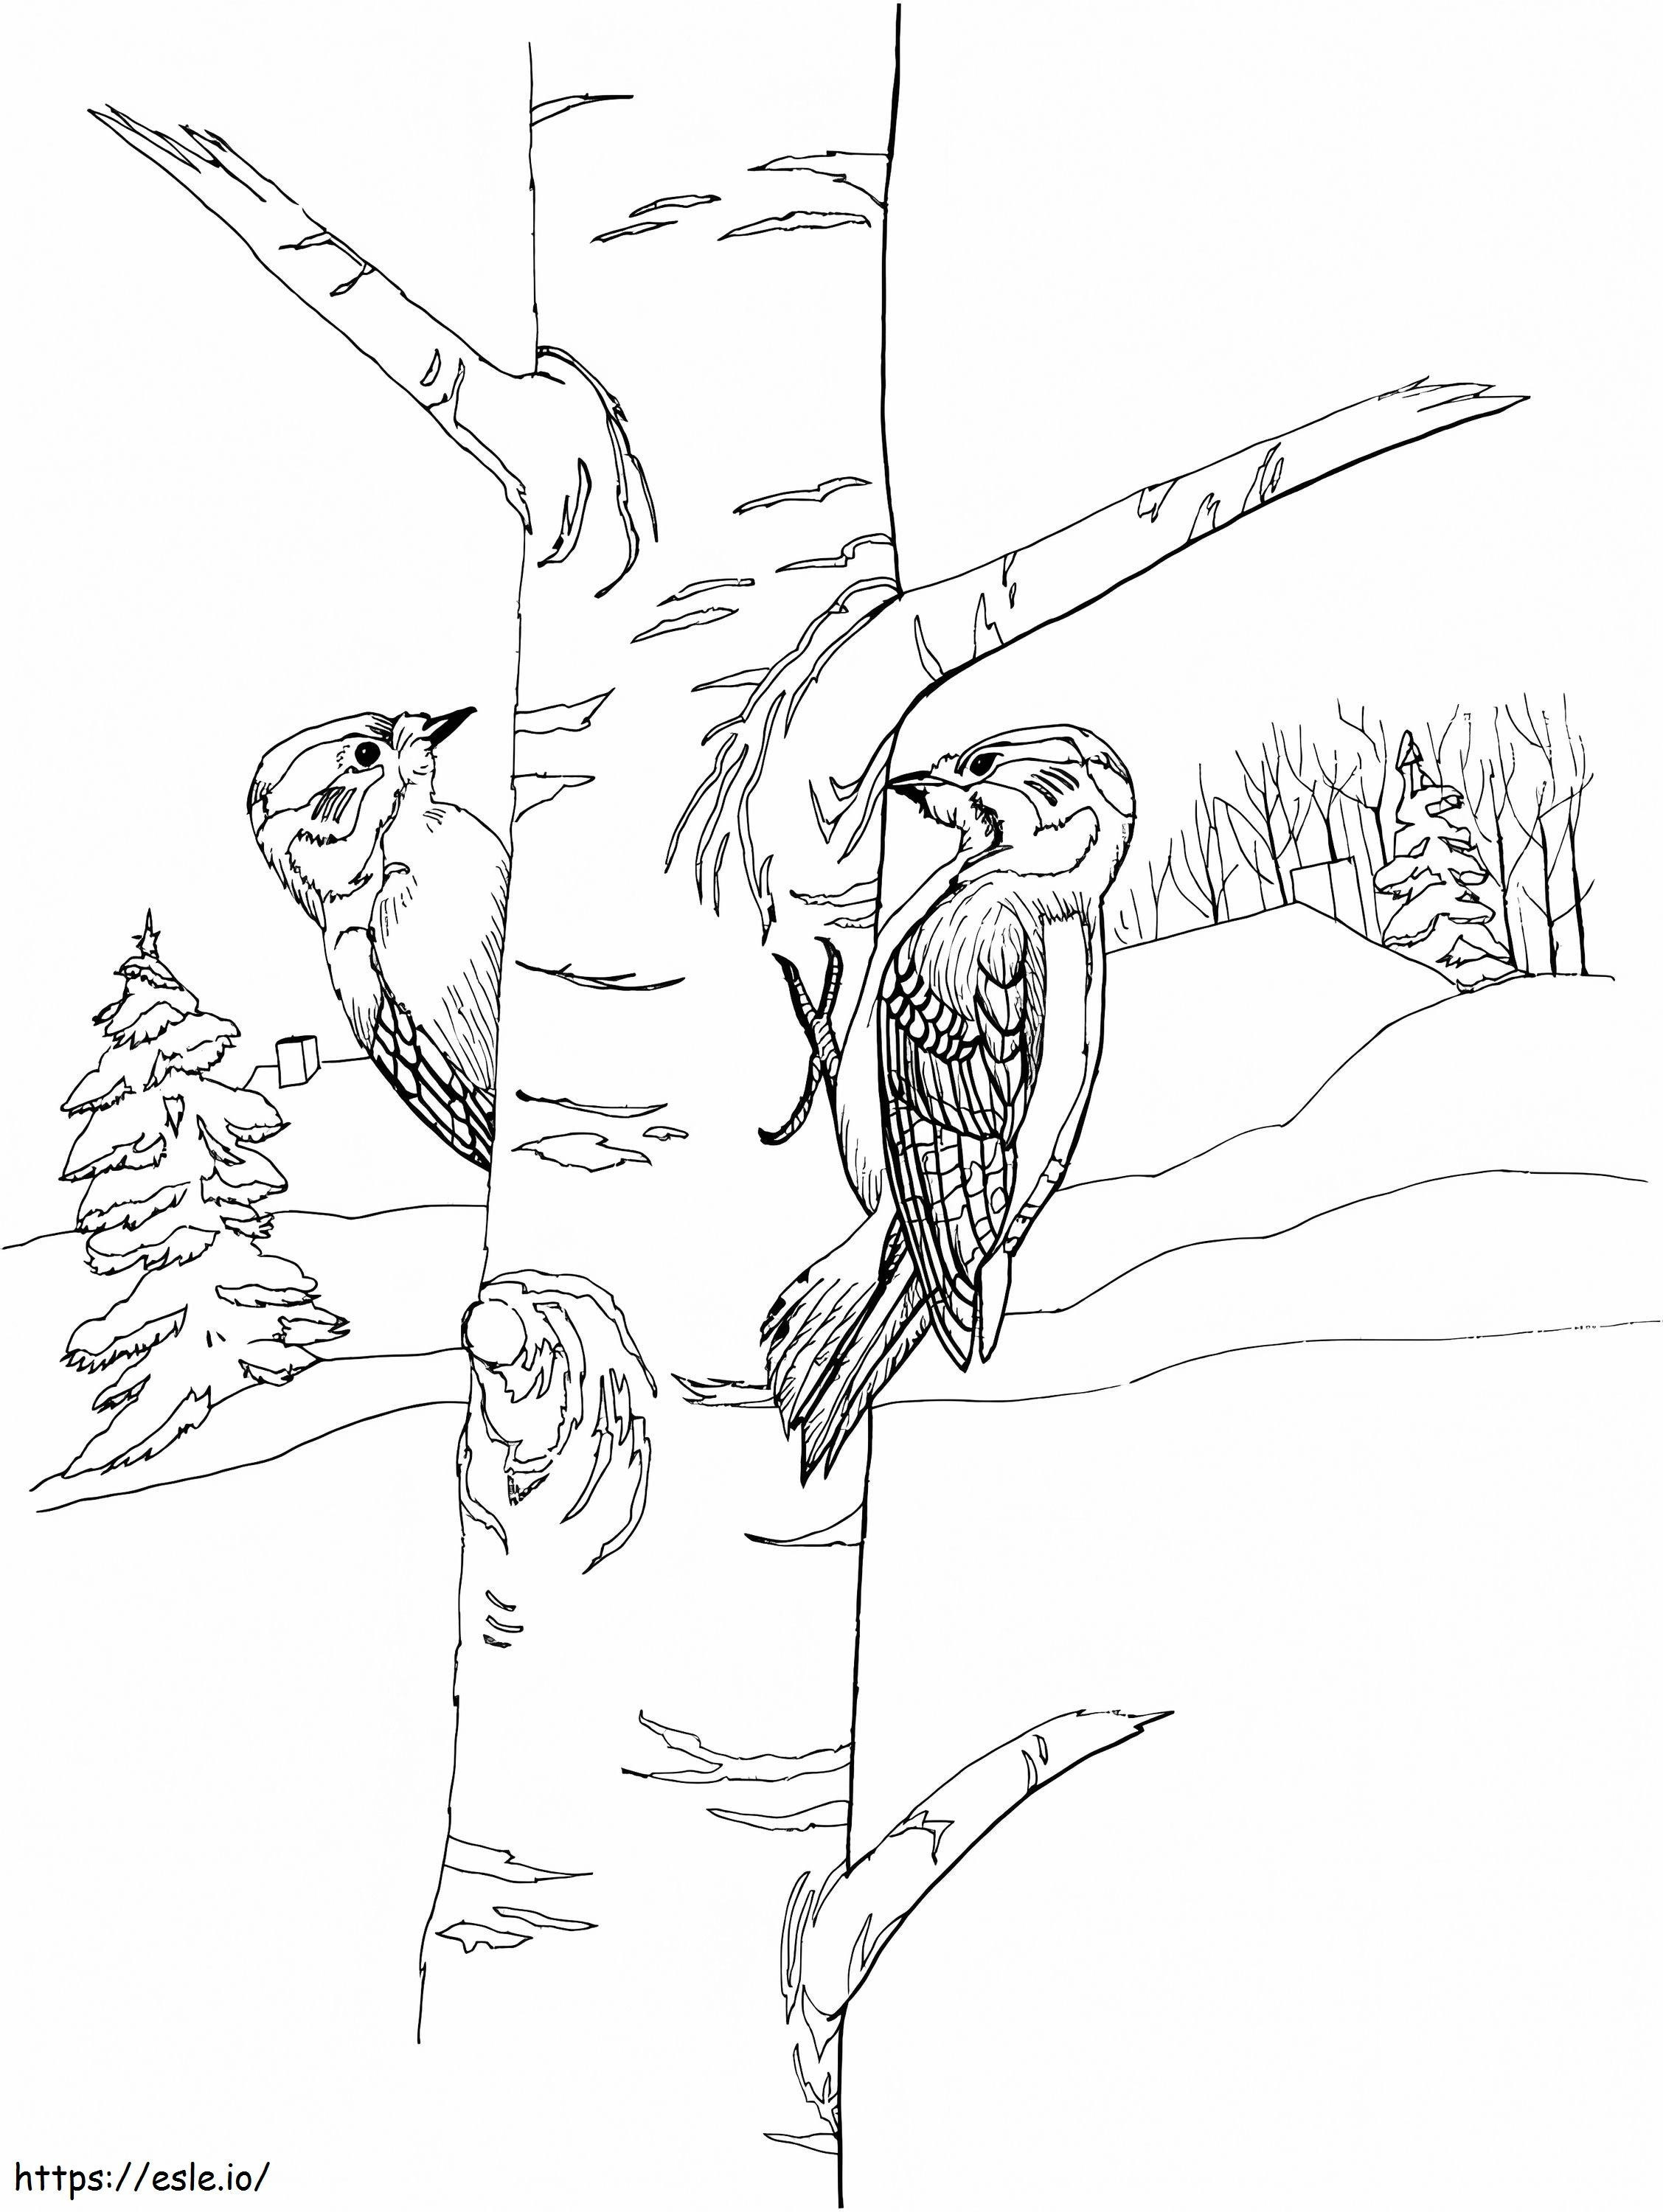 Woodpeckers coloring page